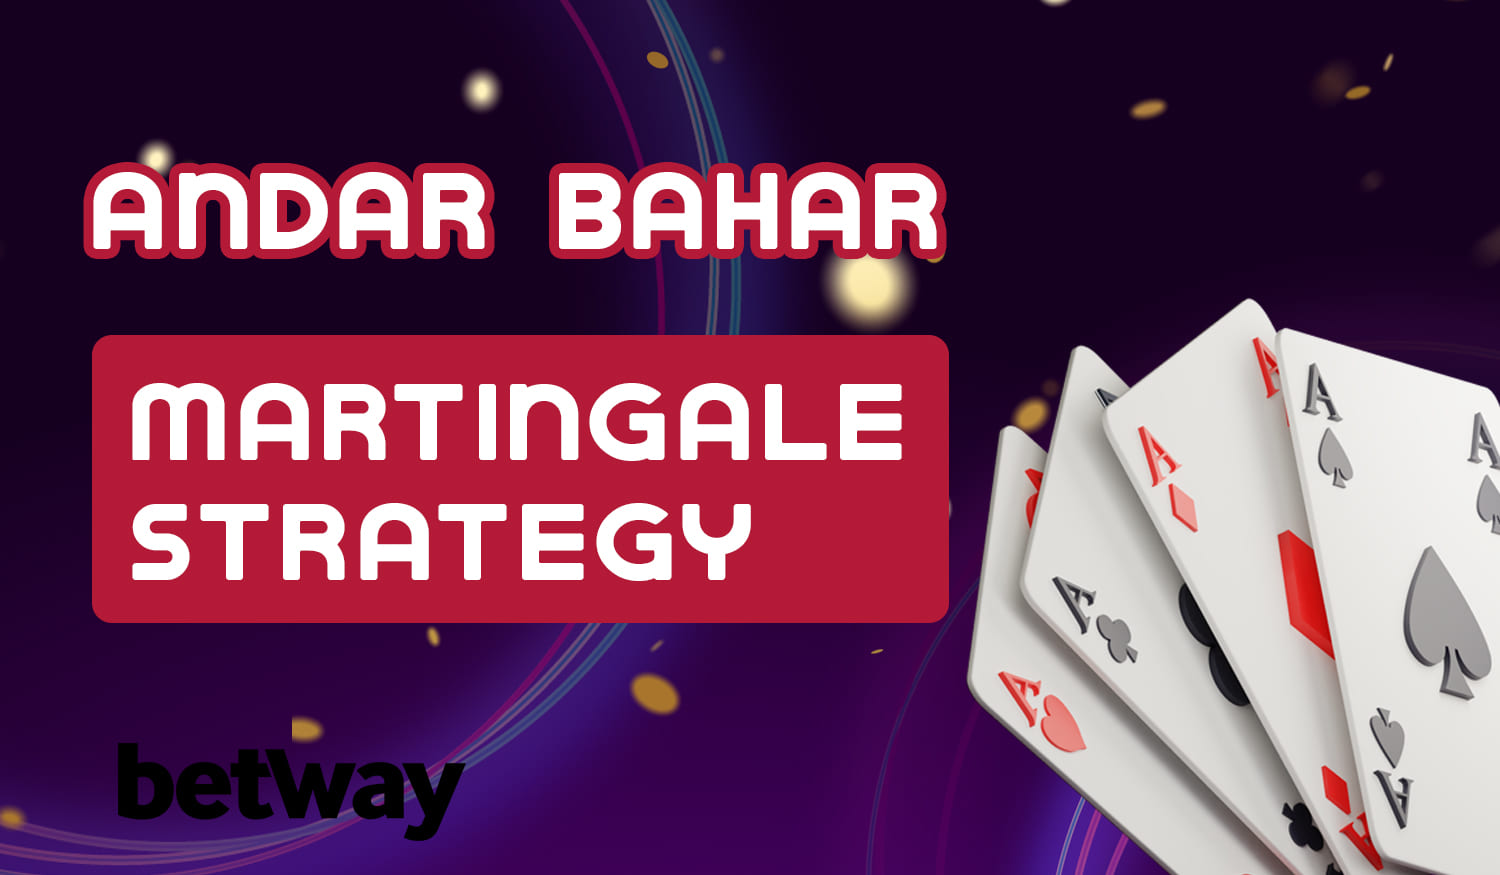 A detailed description of the Martingale Strategy and its application when playing Andar Bahar 